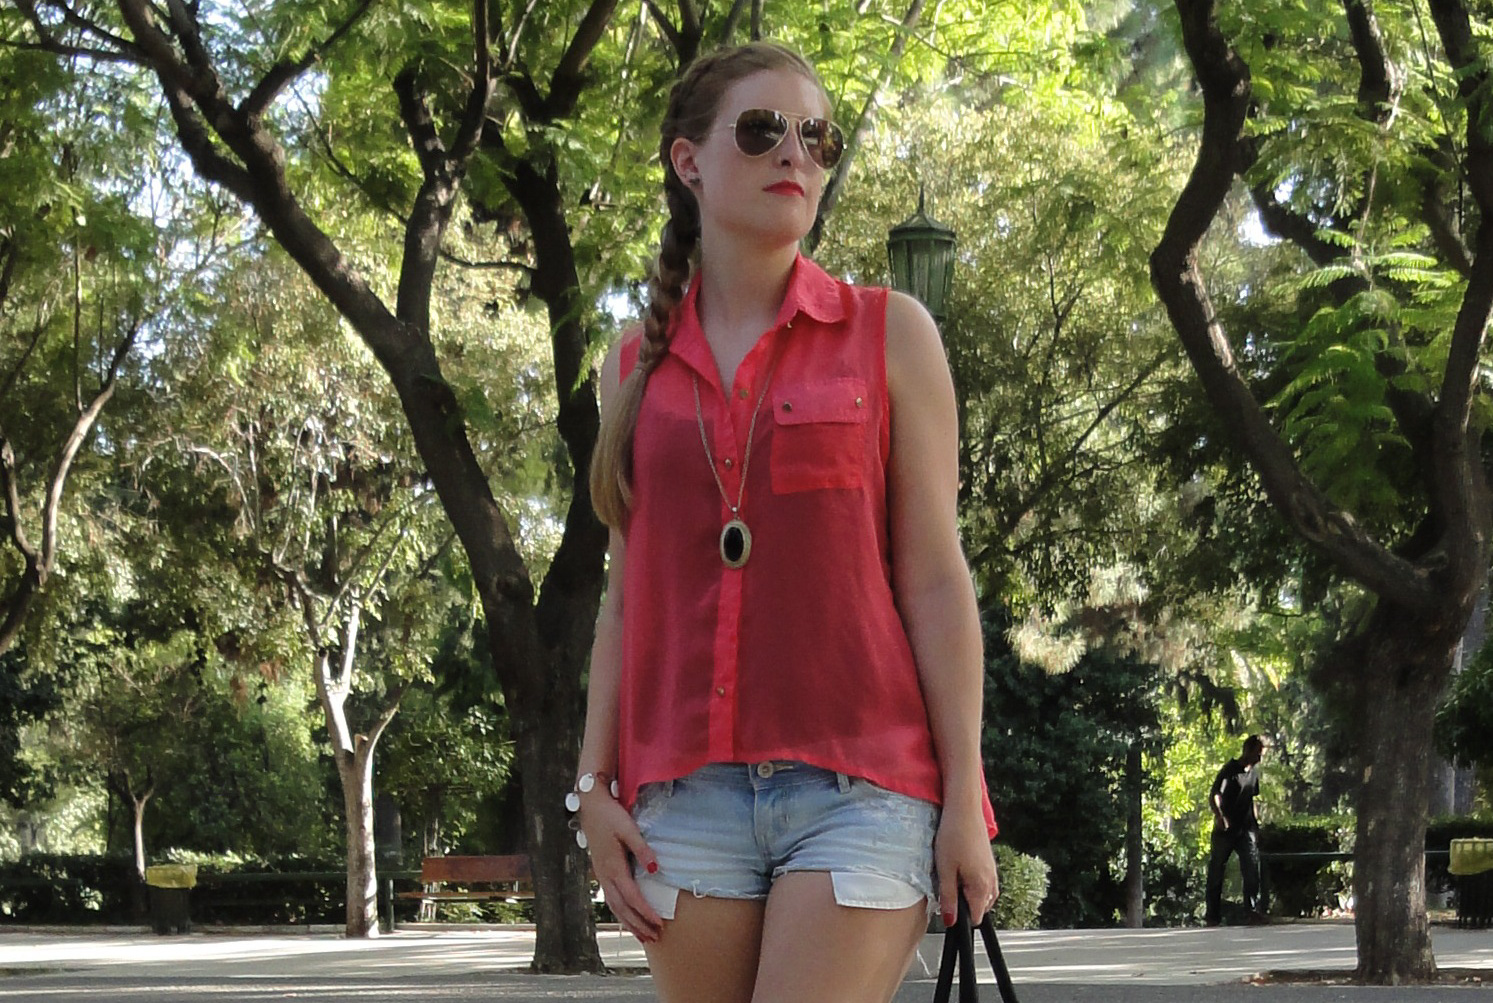 Pink Blouse Streestyle Outfit Jeanshotpants Hollister Athens Athen Griechenland Modeblog Sightseeing Look